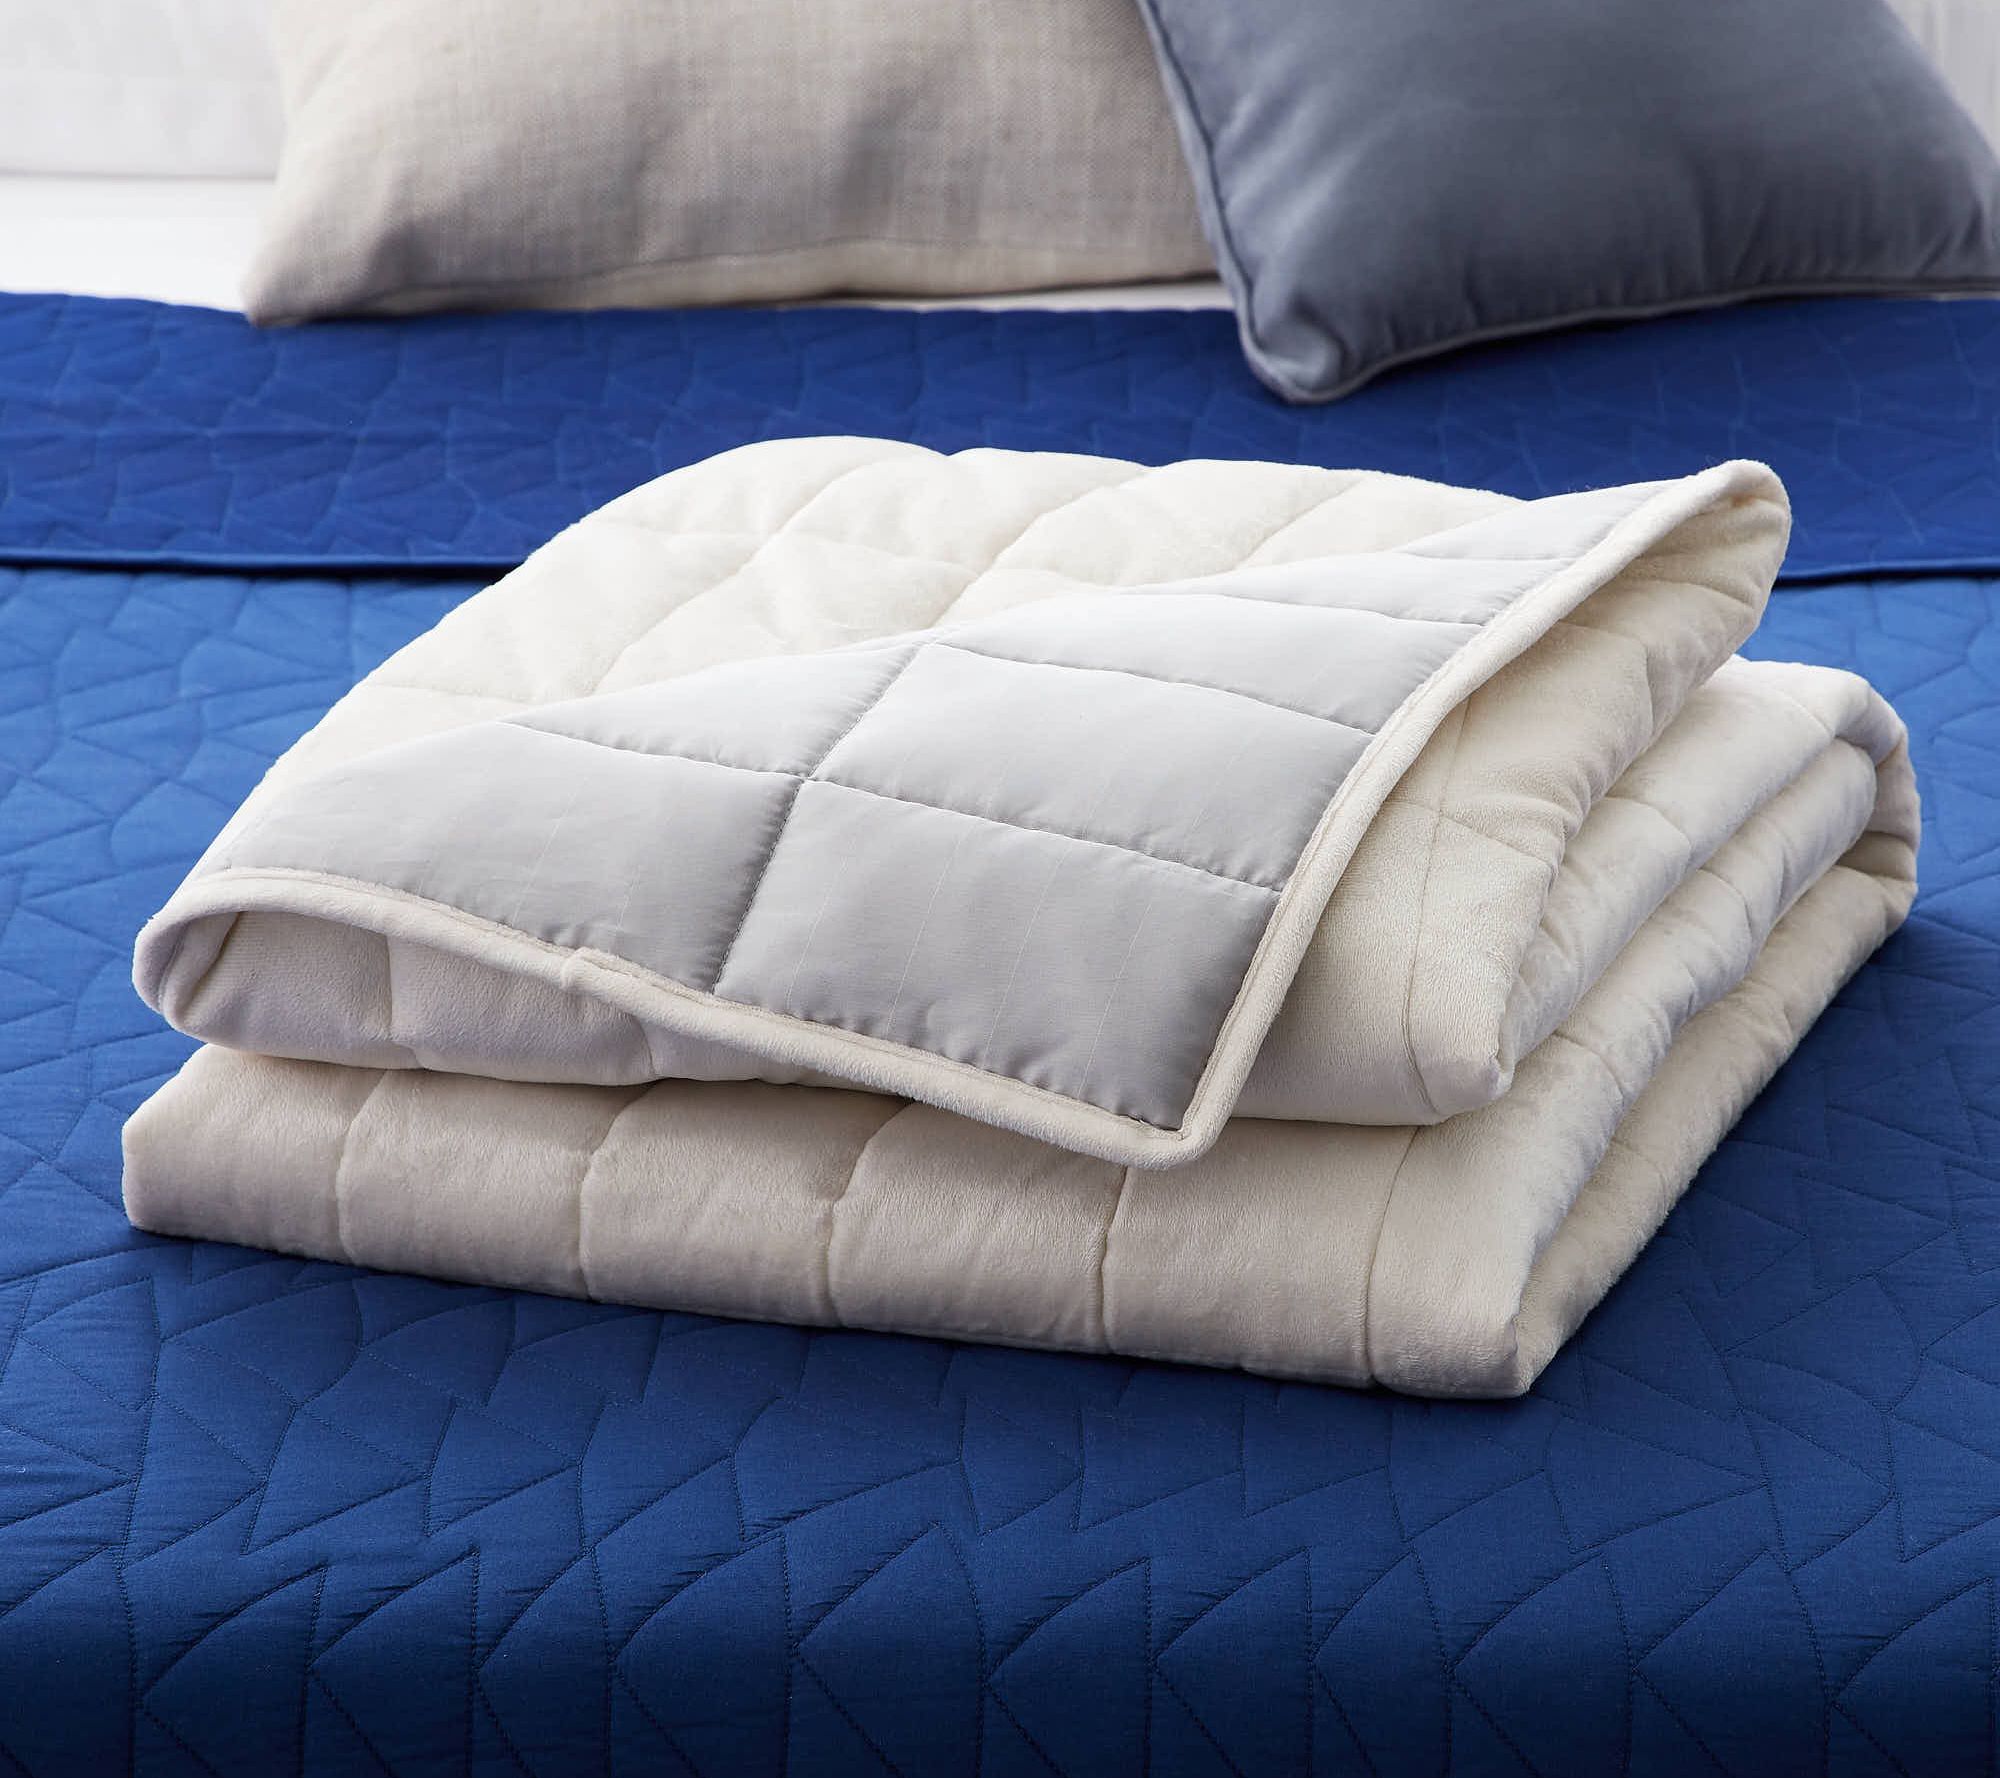 Dr. Oz Good Life Reversible Weighted Blanket - 15lb - QVC.com